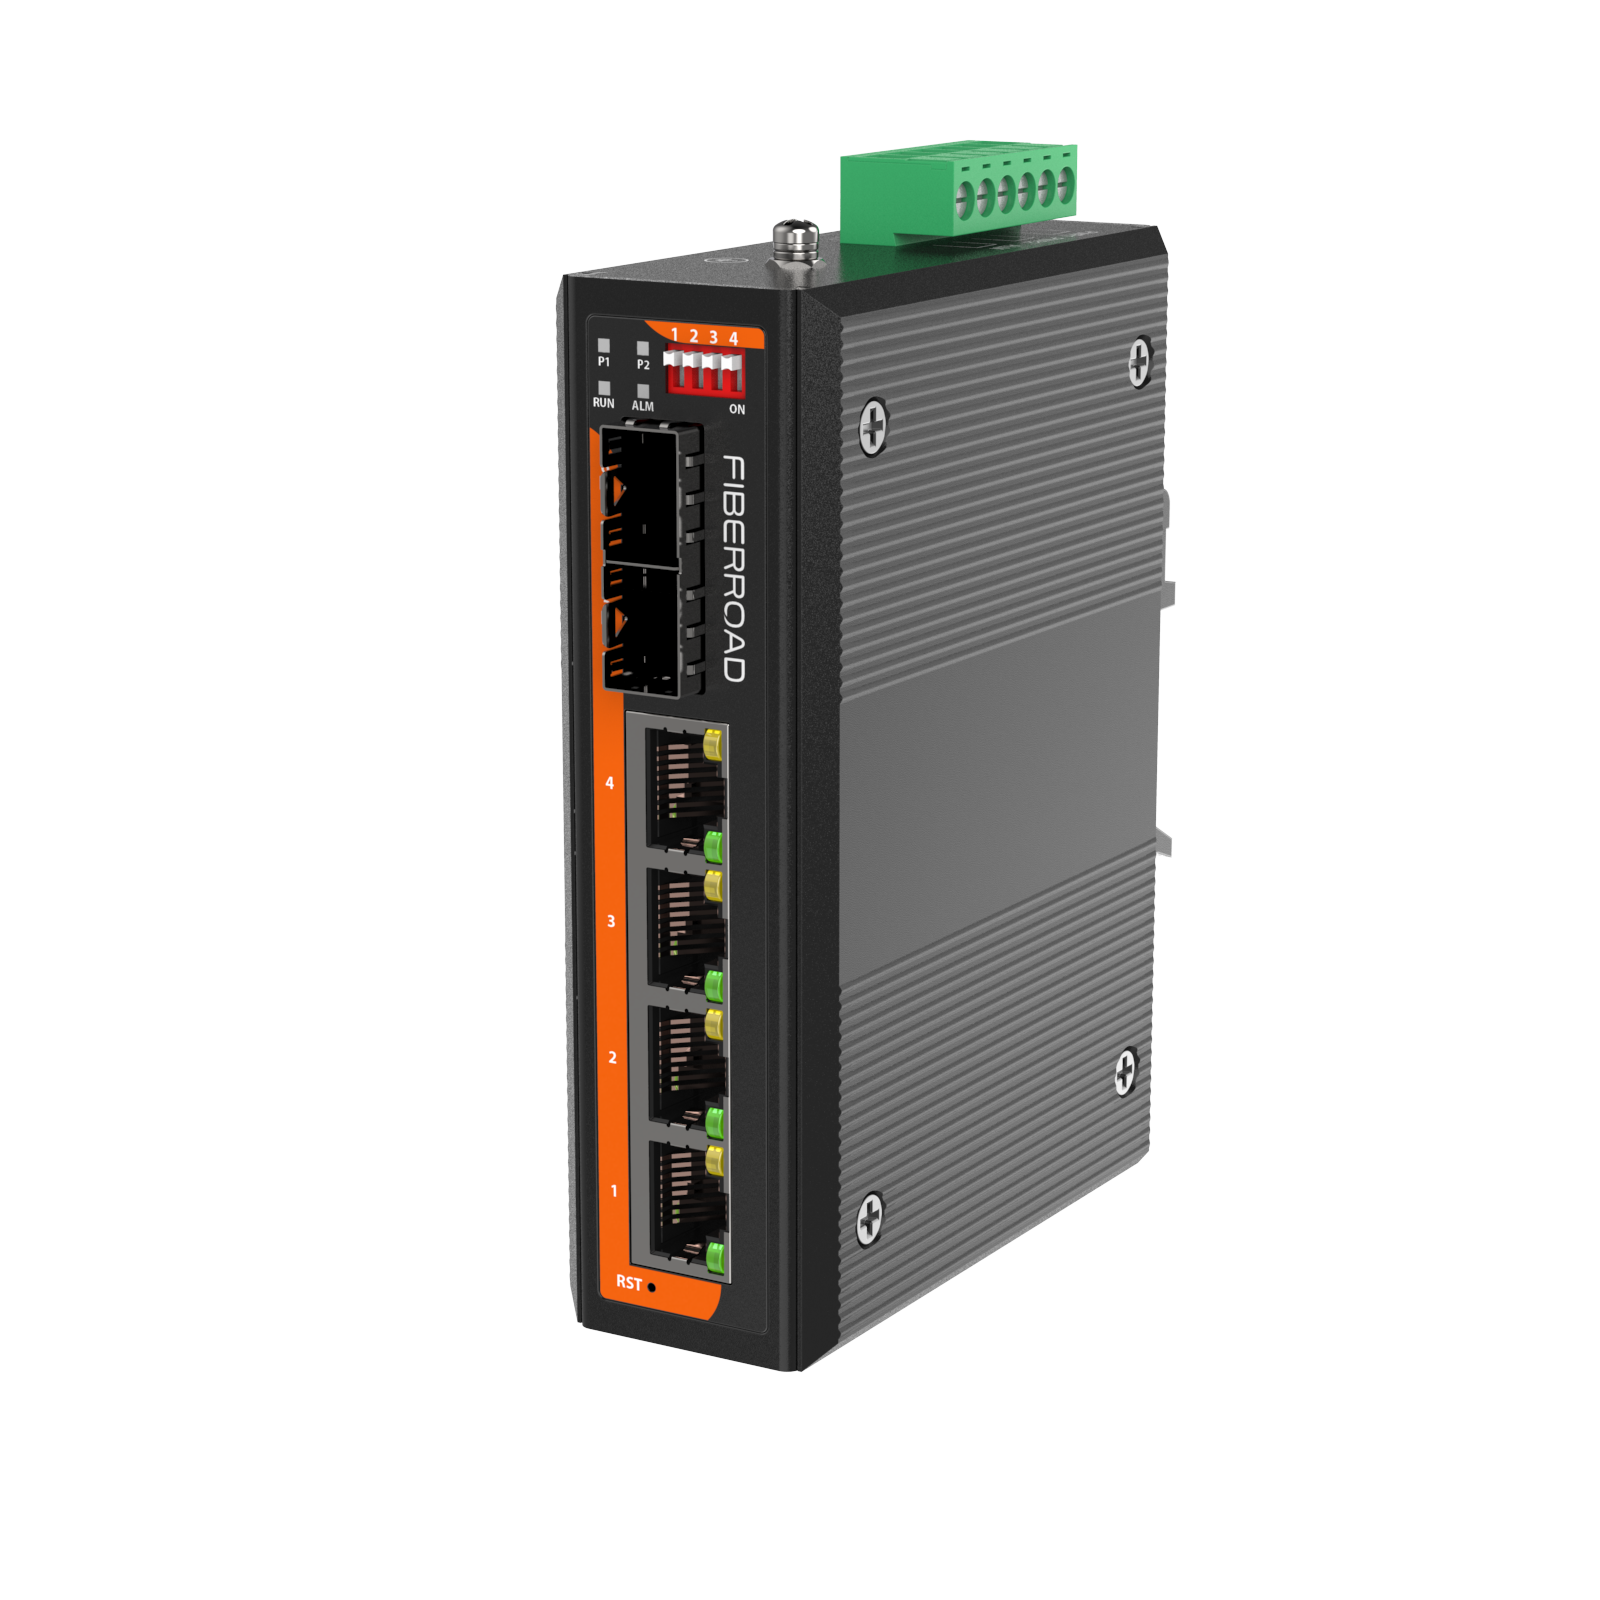 Managed Industrial PoE Network Switch, Ultra PoE